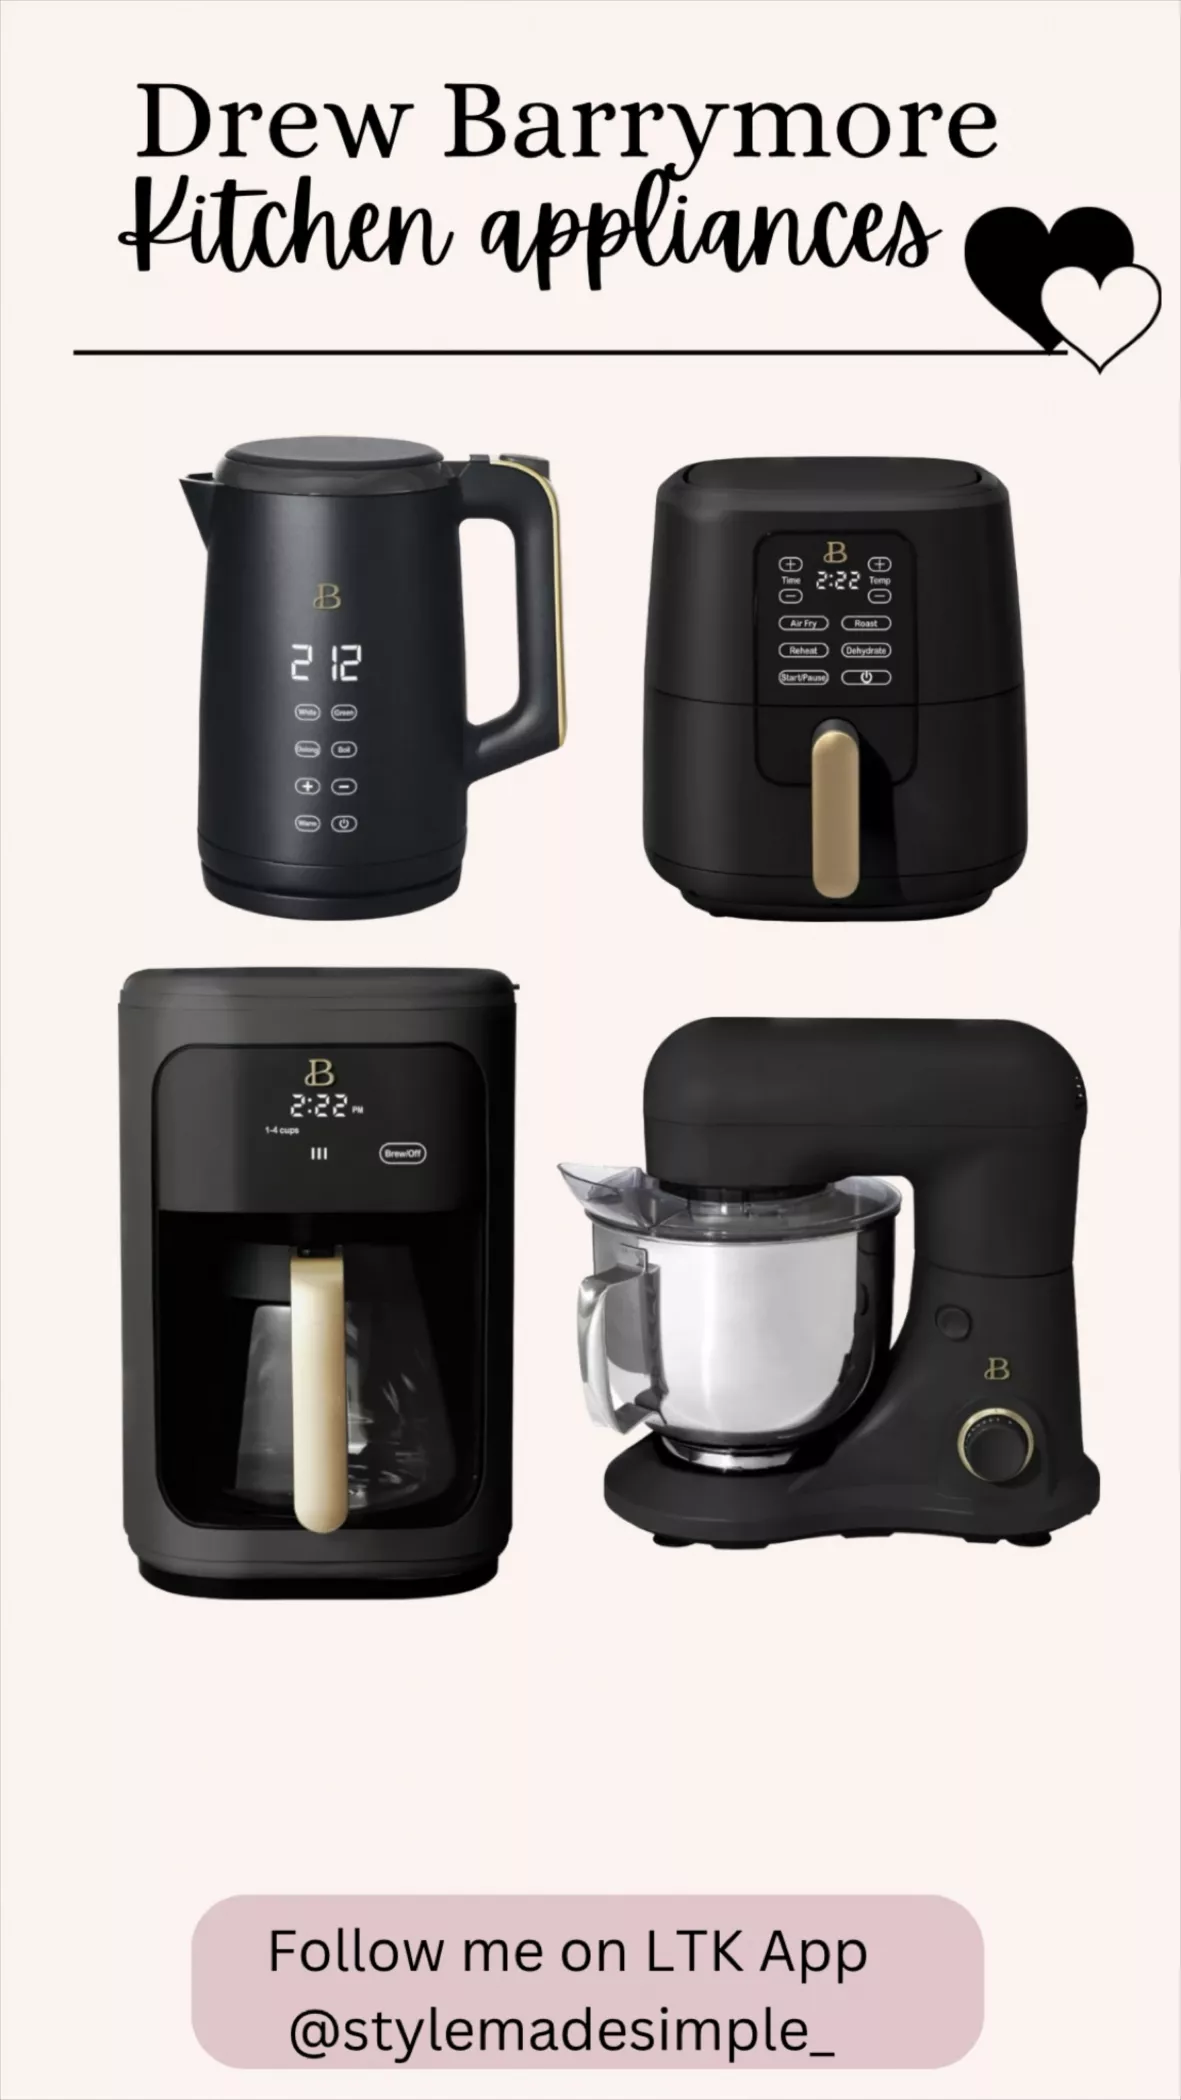 Beautiful 1.7-Liter Electric Kettle 1500 W with One-Touch Activation, Black  Sesame by Drew Barrymore 